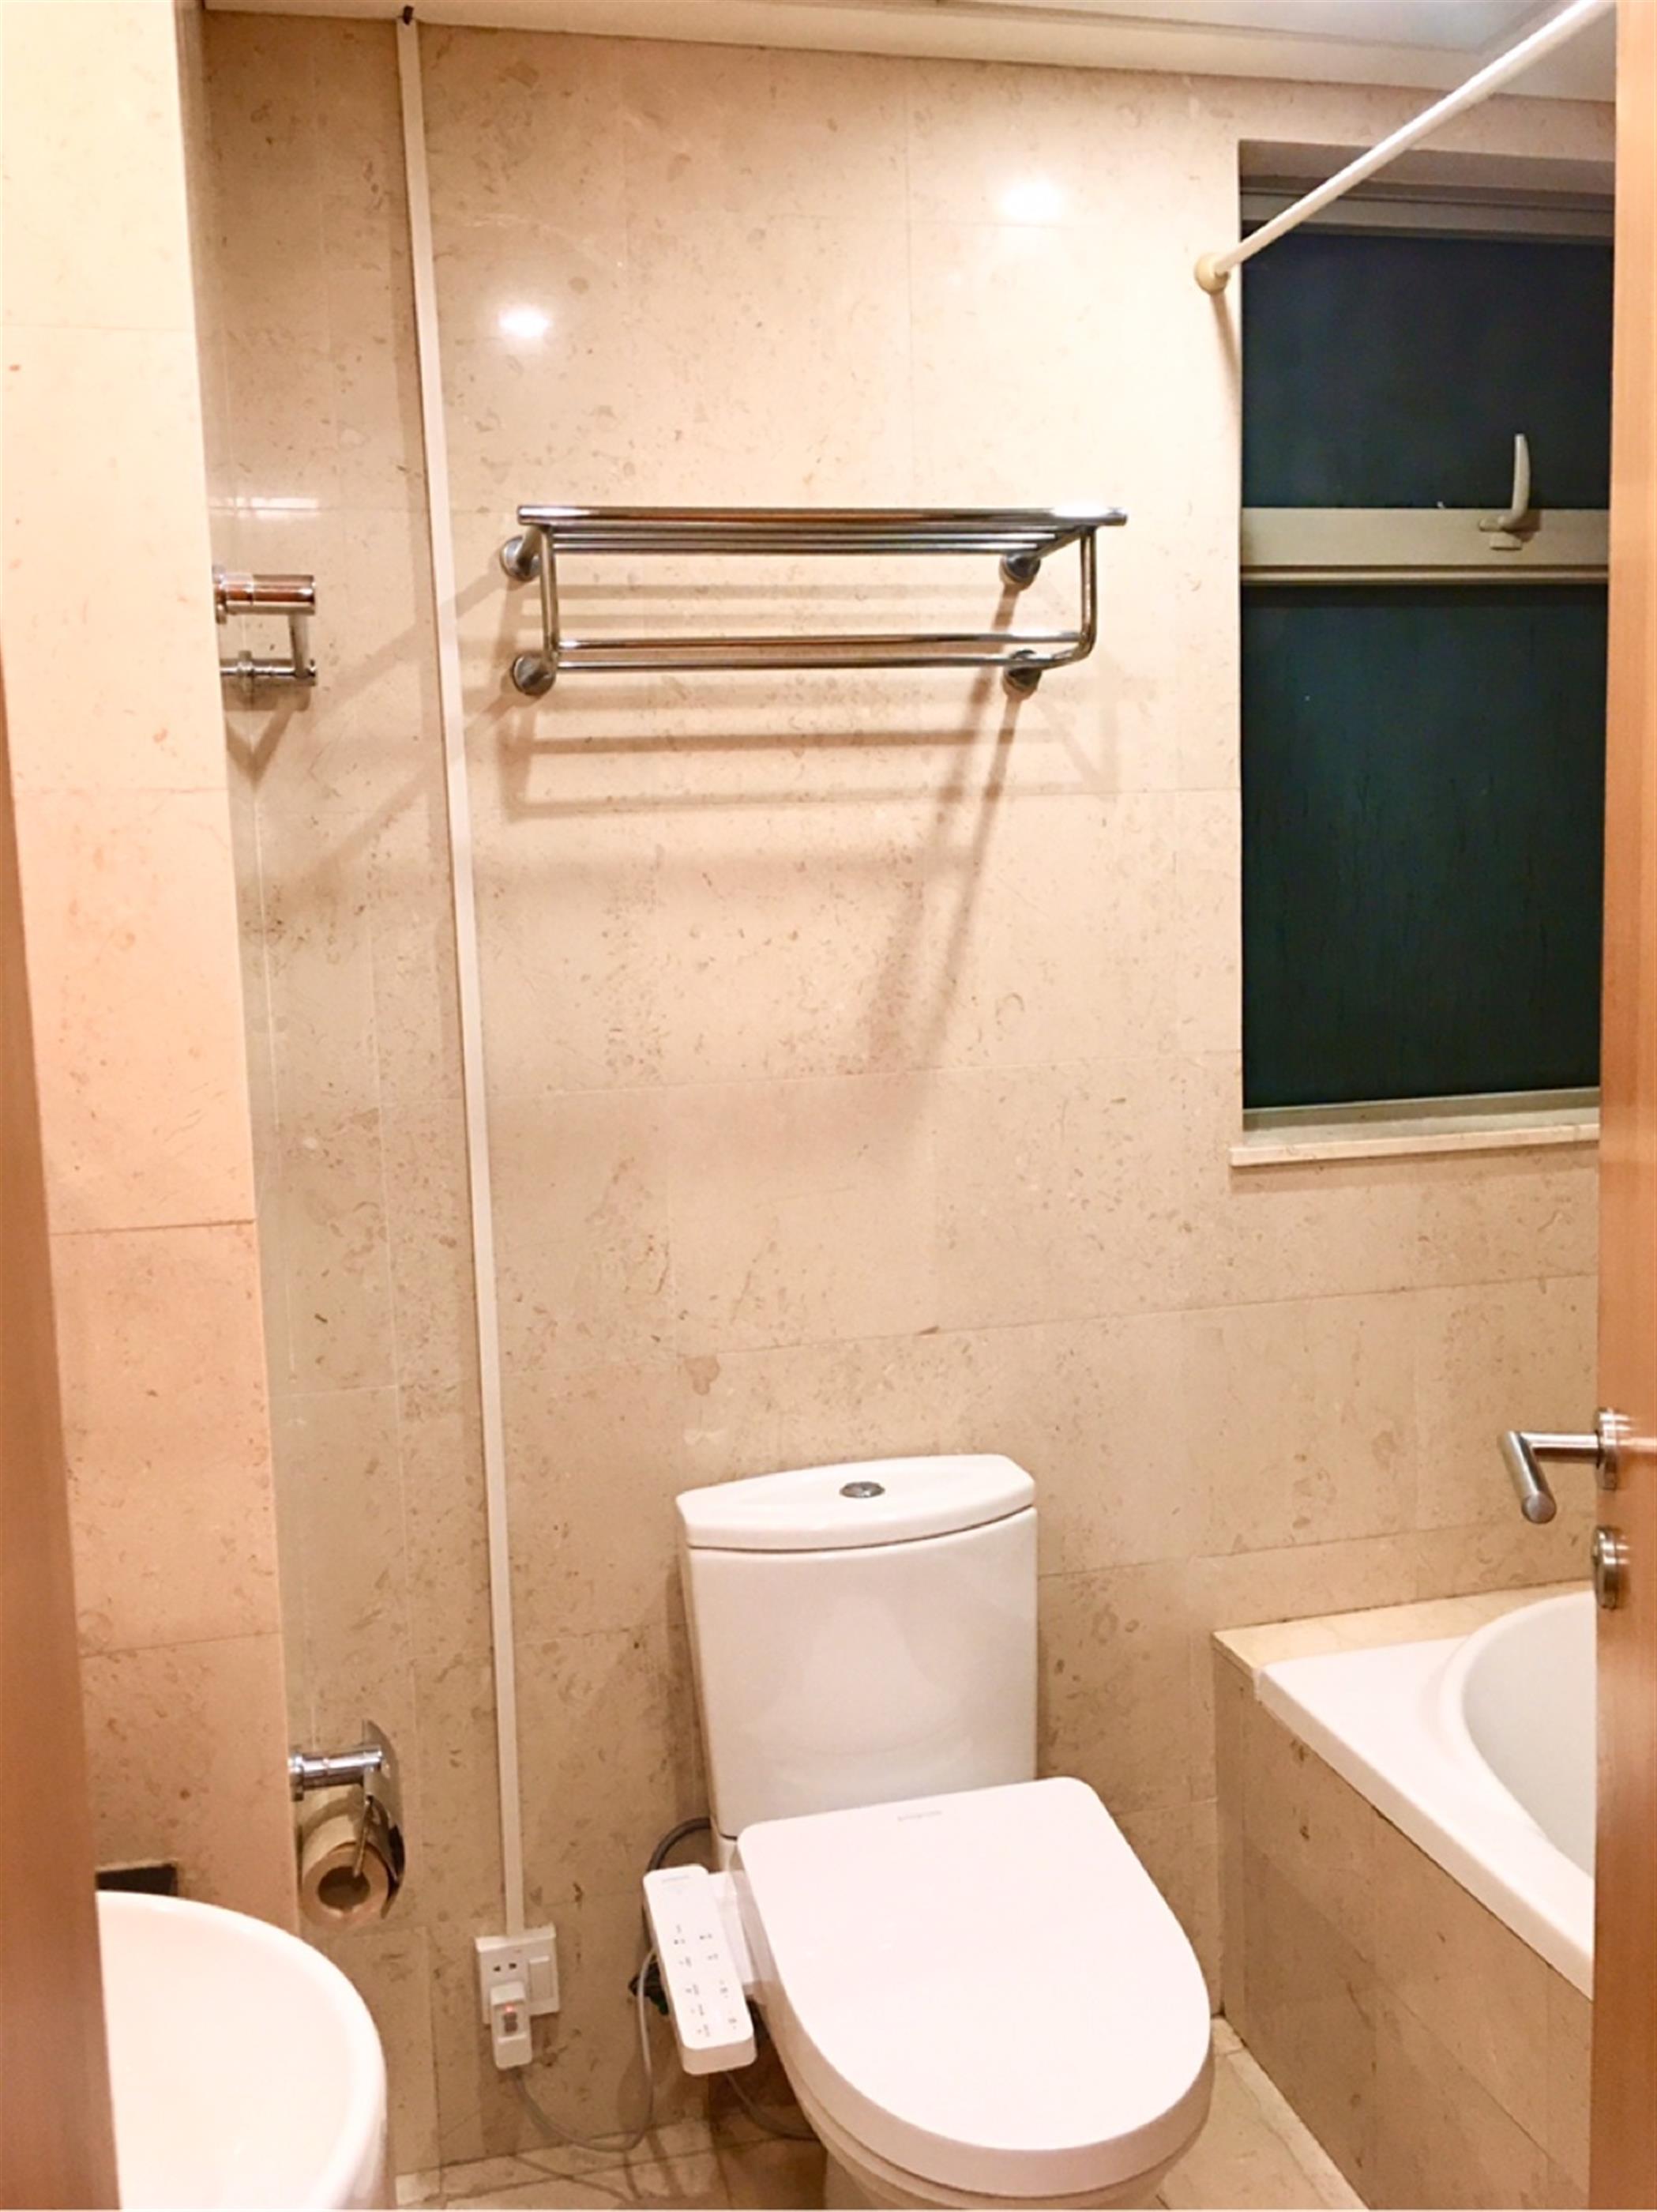 Bathtub Large Comfortable 2BR One Park Ave Apt for Rent in Shanghai Jing’an Near LN 2/7